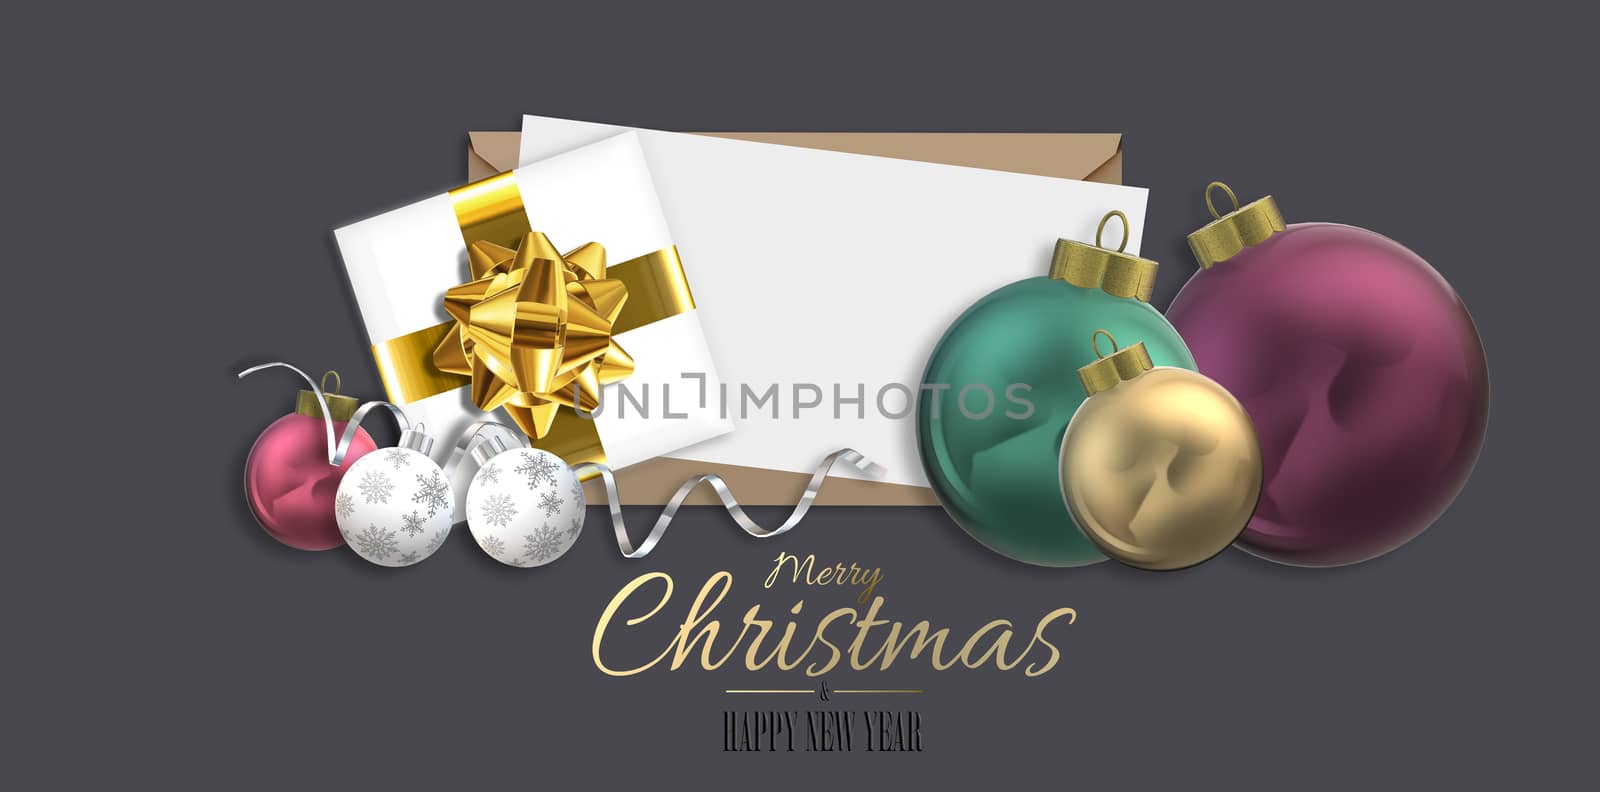 3D realistic Christmas design with realistic Xmas ball bauble, Xmas gift box with bow, text Merry Christmas Happy New Year on white envelope over dark brown. Horizontal 3D illustration. Place for text